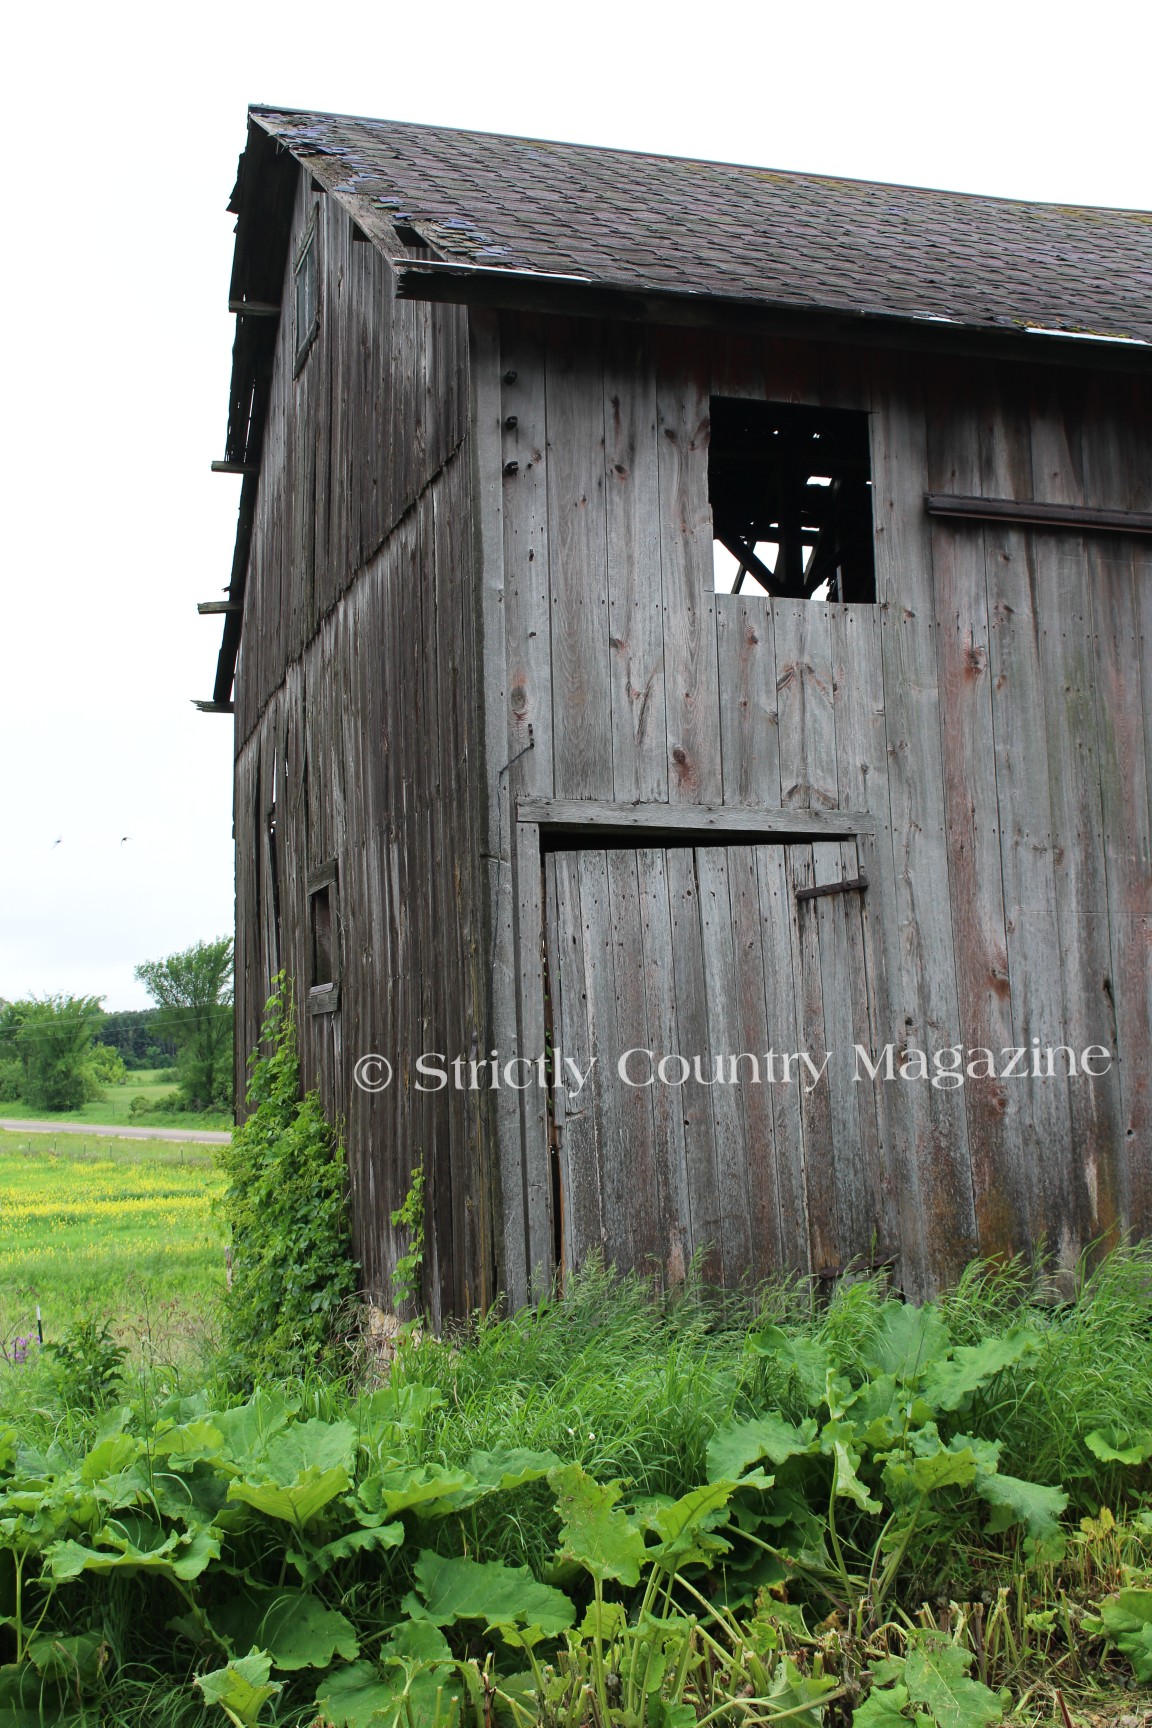 Strictly Country copyright Old building in Wisconsin